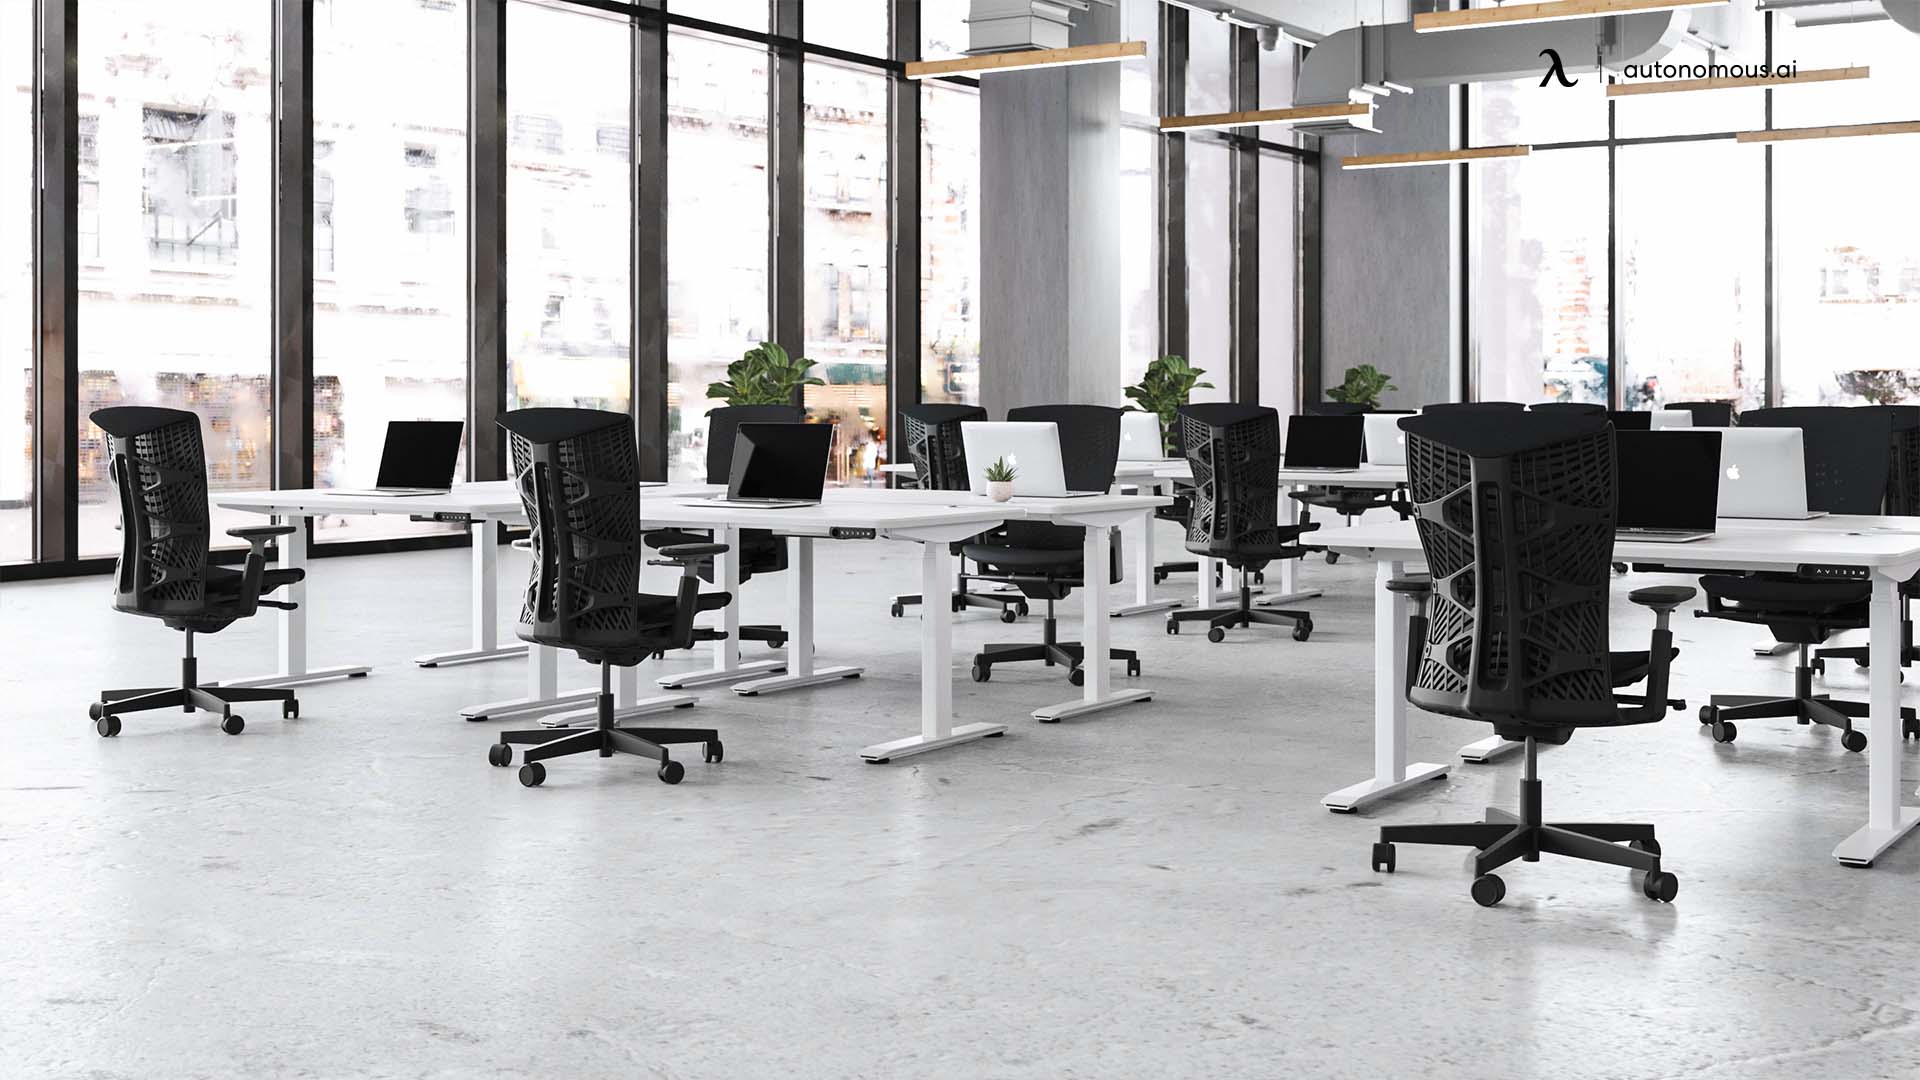 Make Inventory of the New Space when moving office furniture